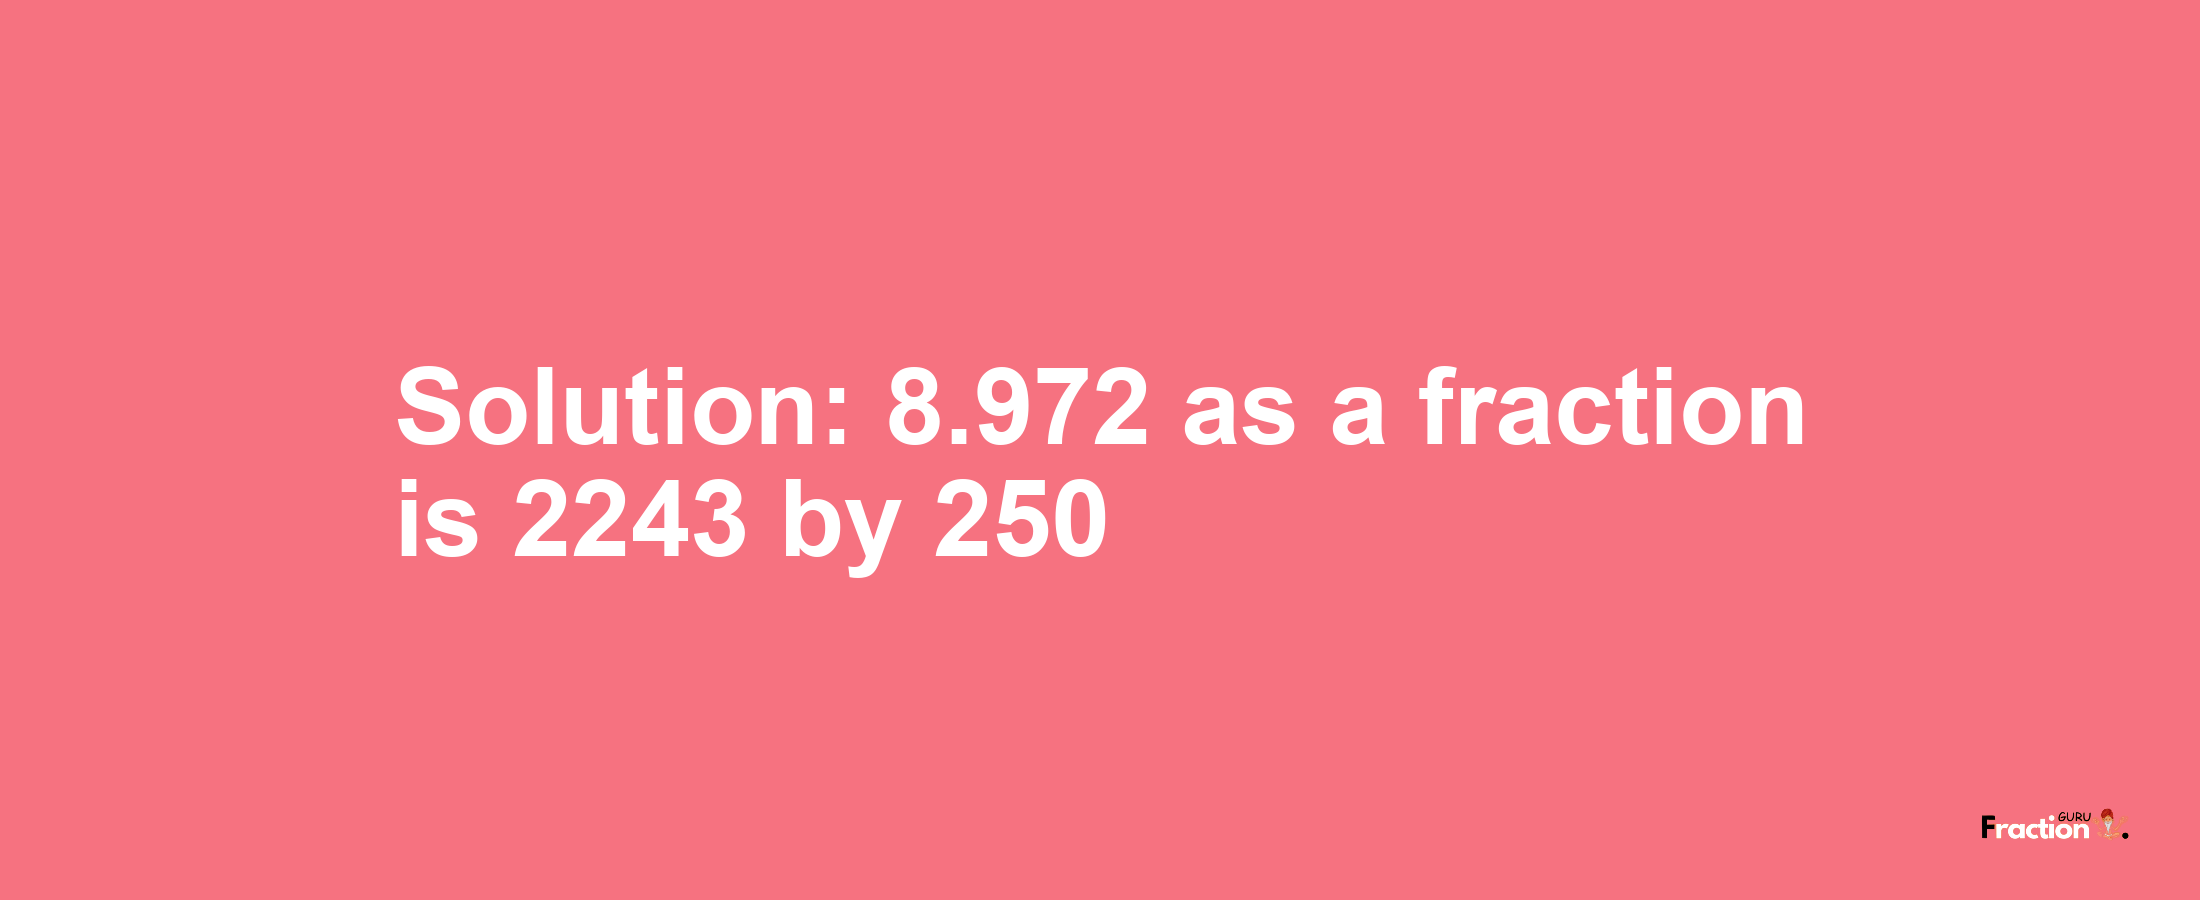 Solution:8.972 as a fraction is 2243/250